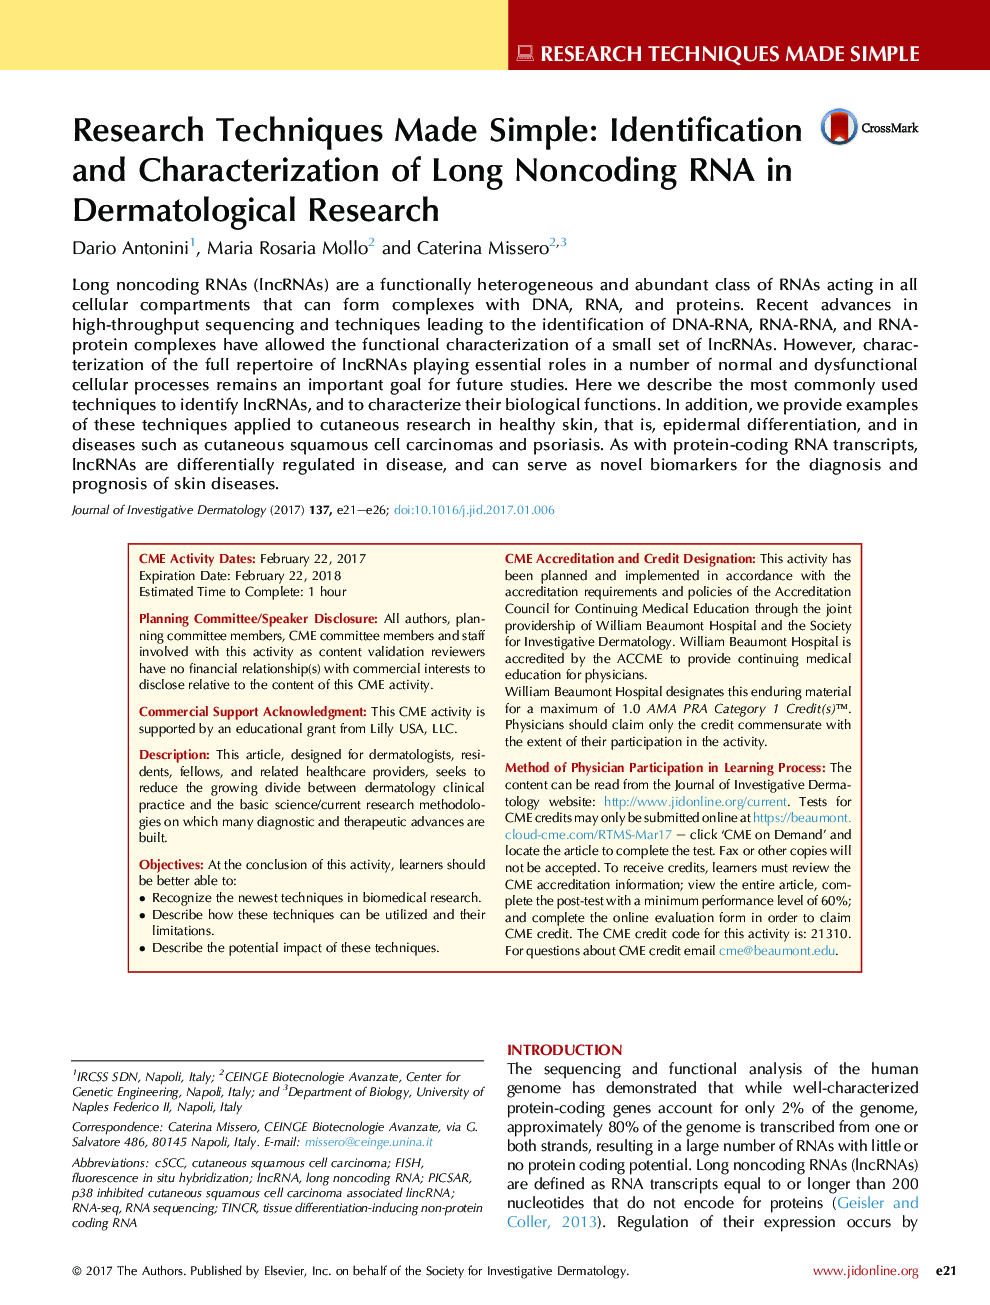 Research Techniques Made Simple: Identification and Characterization of Long Noncoding RNA in Dermatological Research